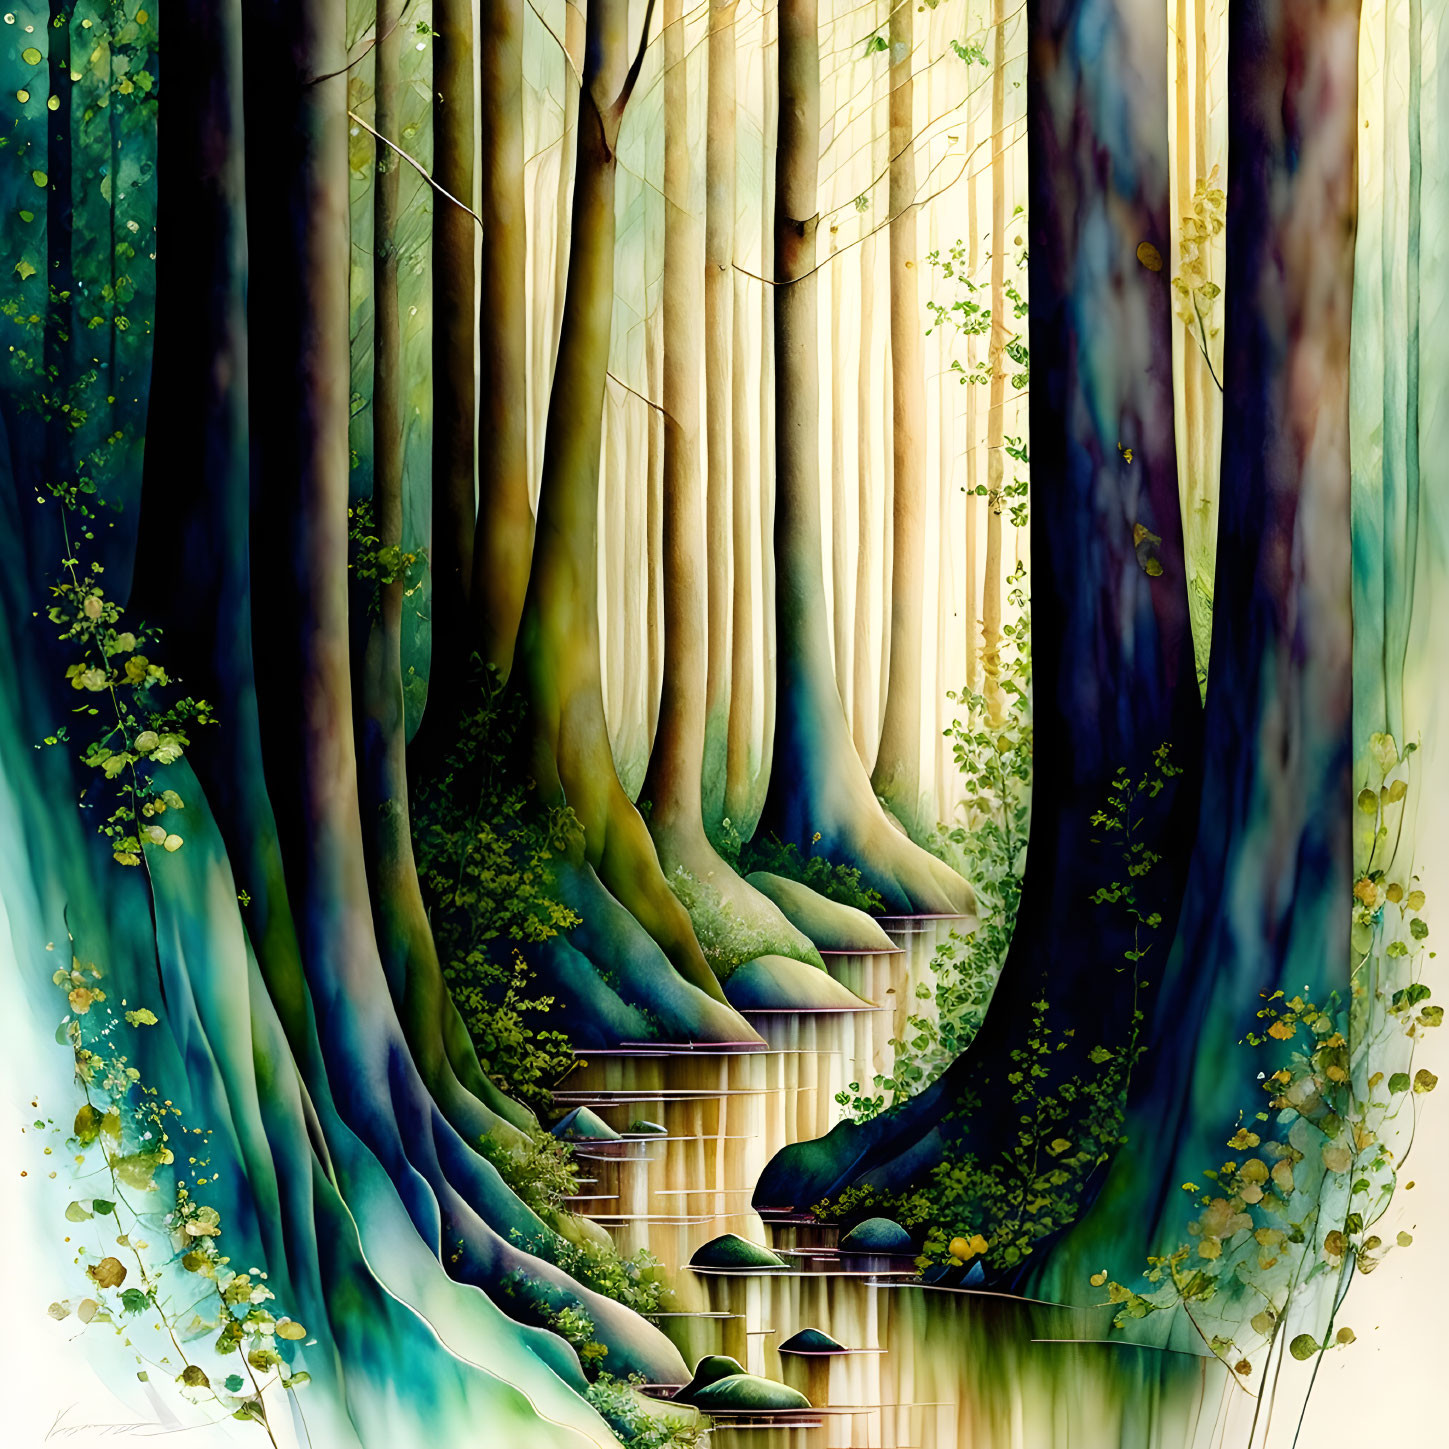 Ethereal forest illustration with tall trees, waterfalls, and lush greenery